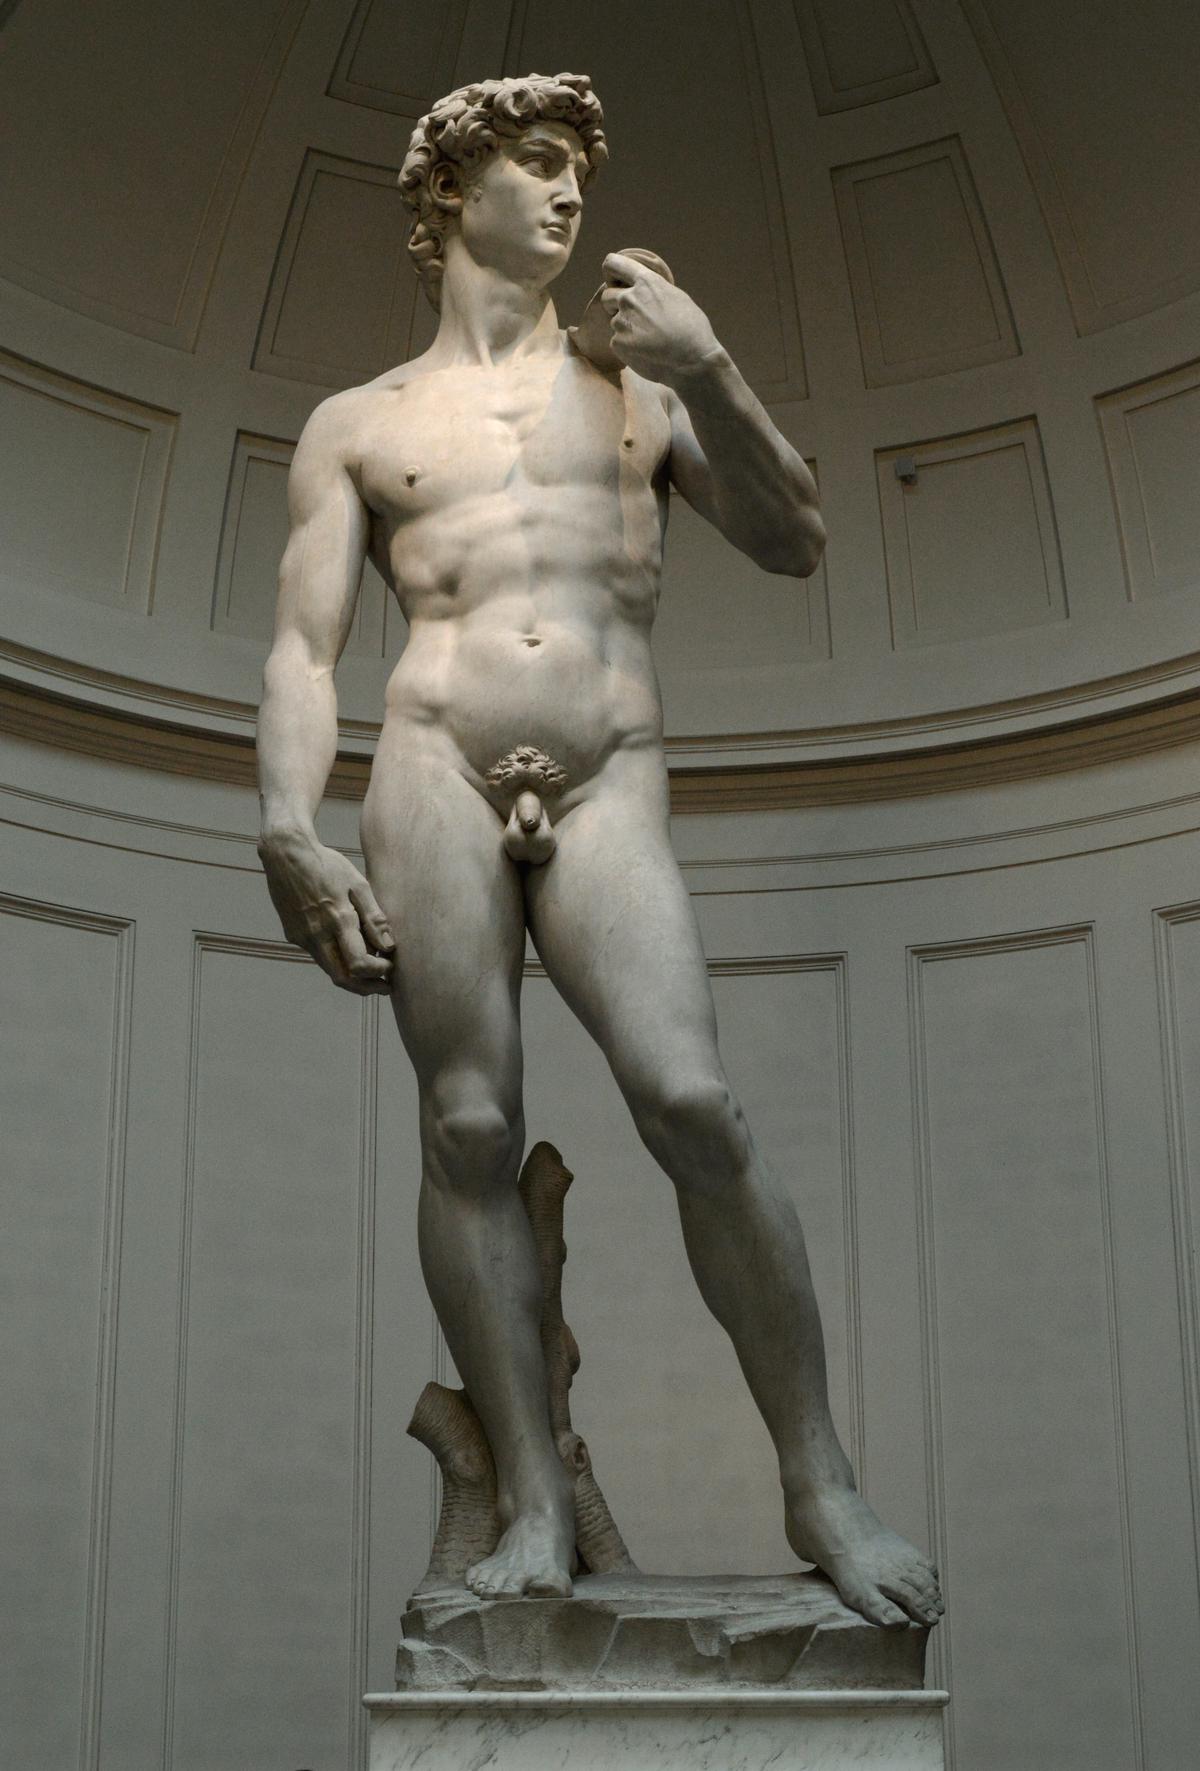 A collection of Michelangelo's sculptures, showcasing David, Moses, The Dying Slave, and The Rebellious Slave, among others.